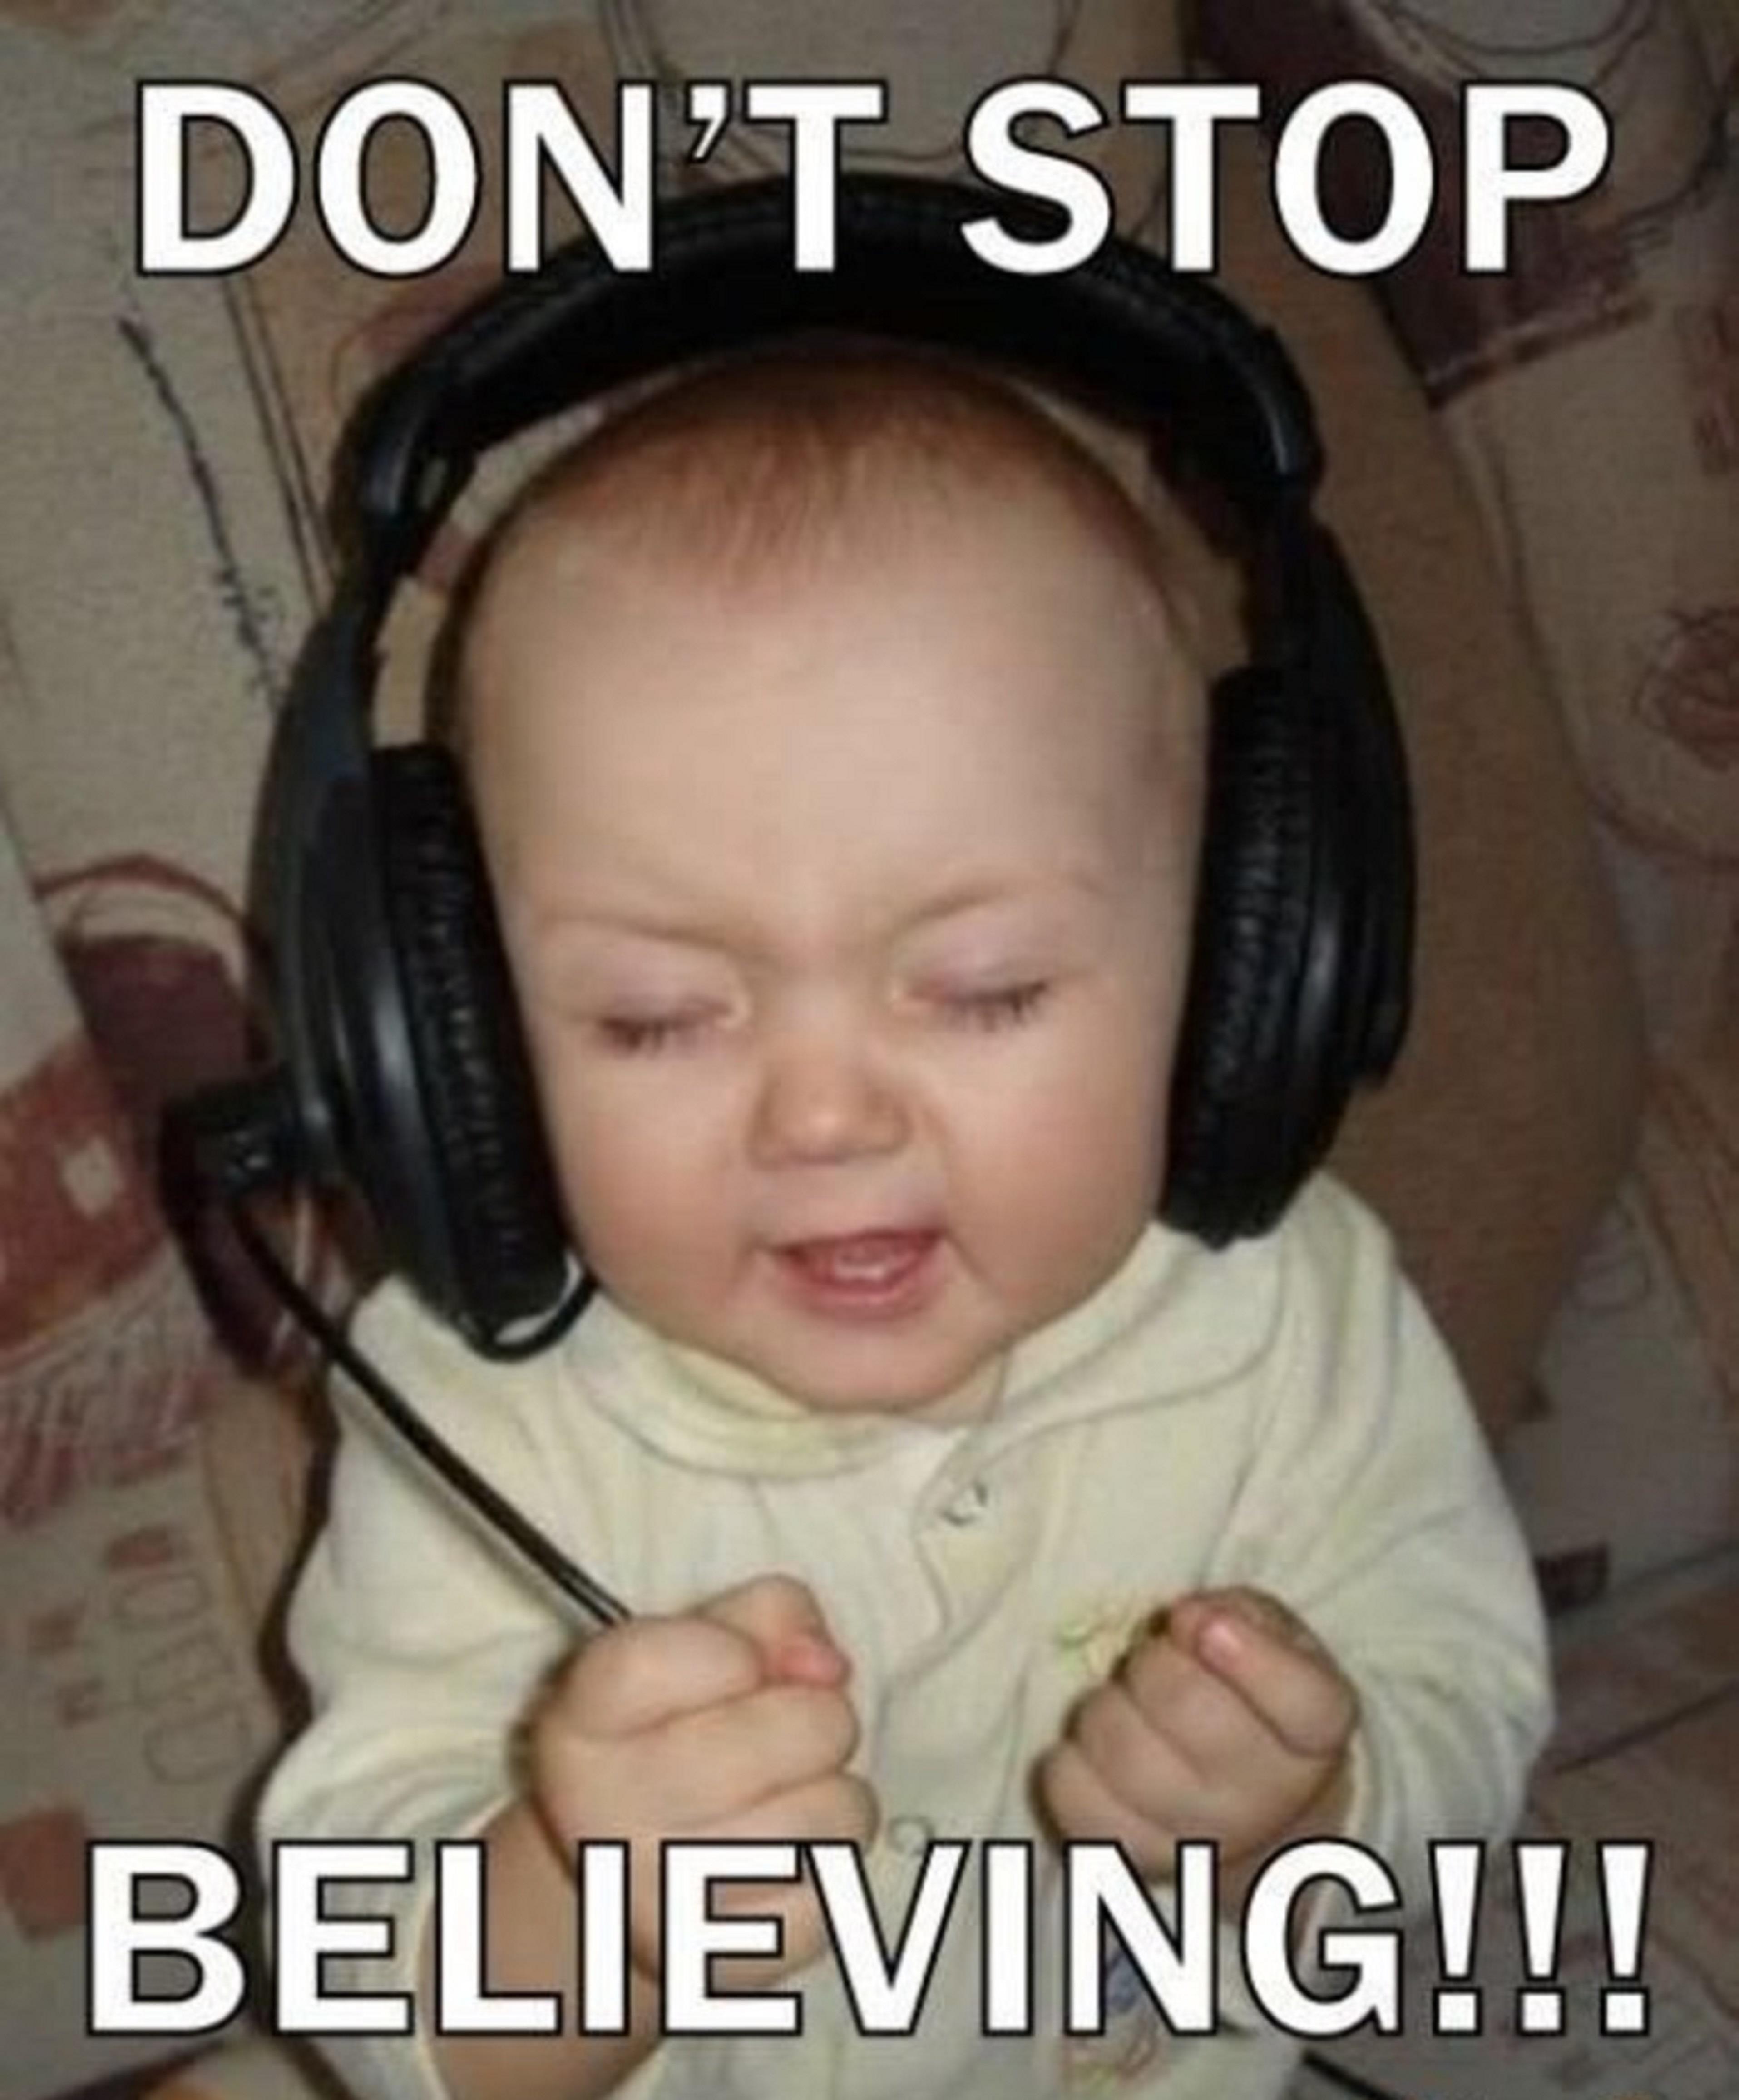 Don't Stop Funny Baby Listening Music Image